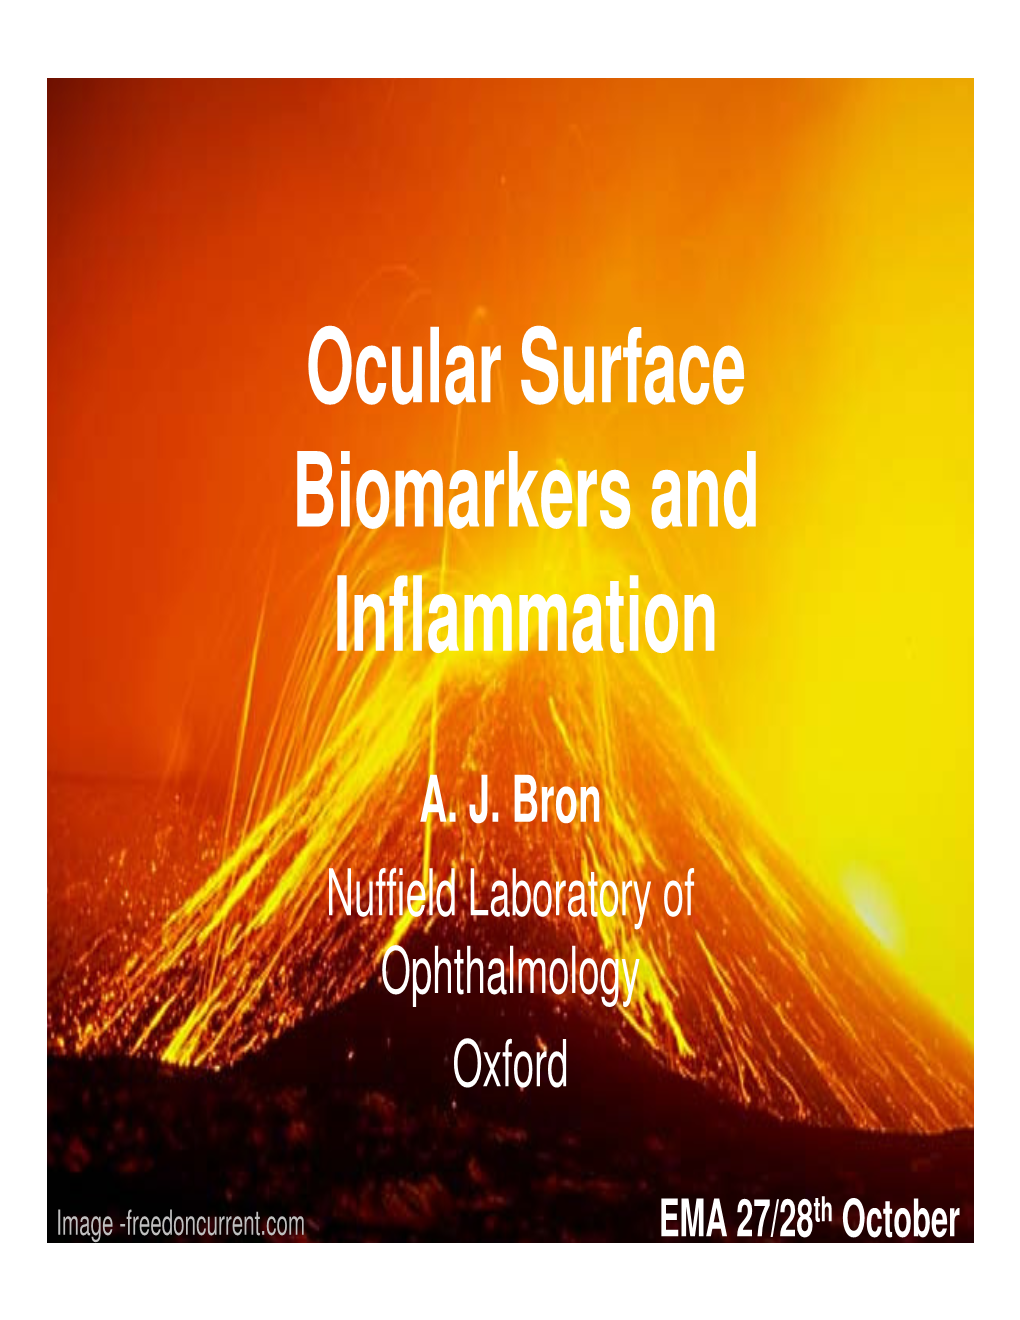 Ocular Surface Biomarkers and Inflammation